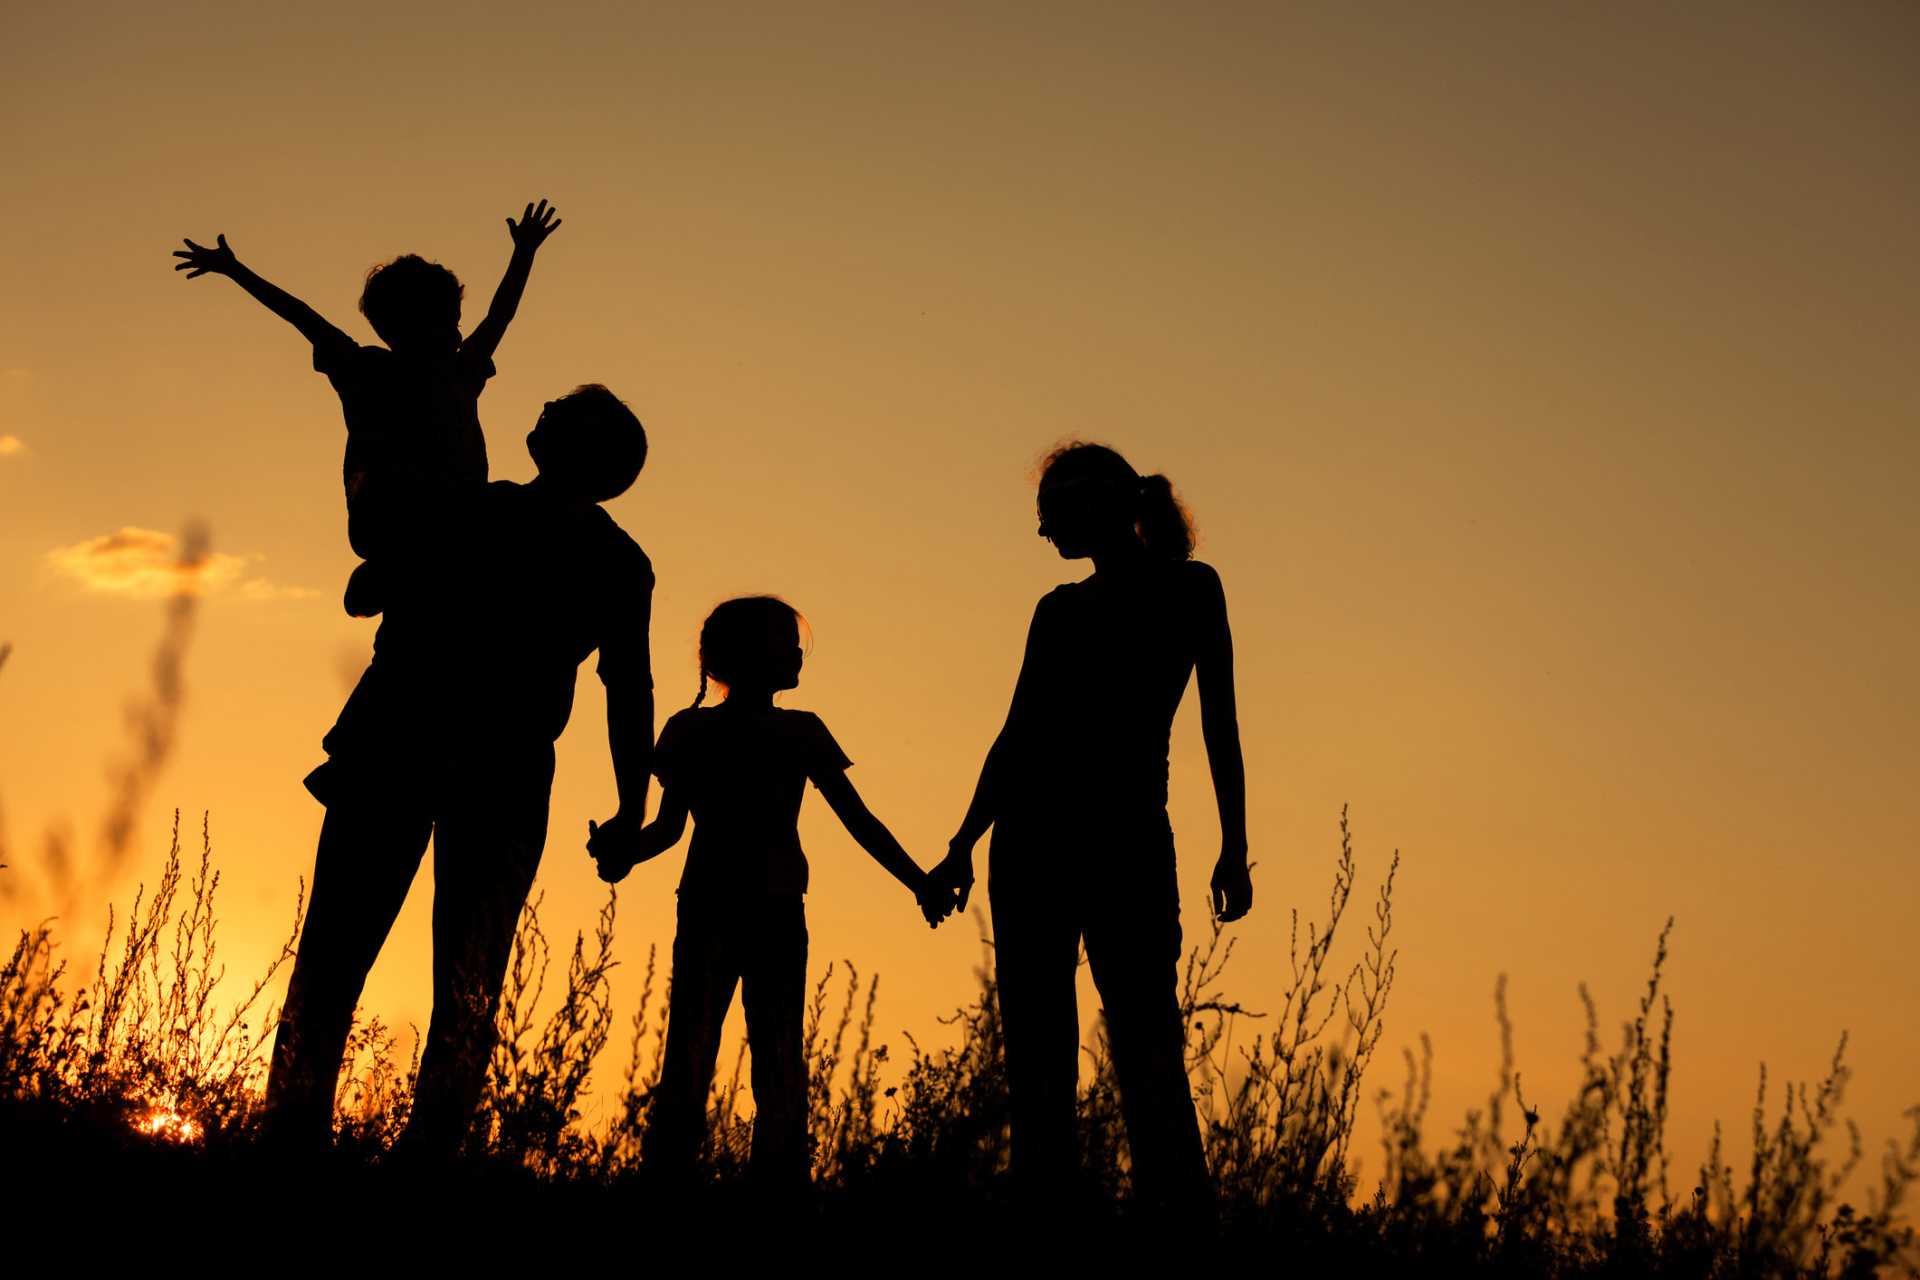 Family standing in a field holding hands at sunset with orange glow